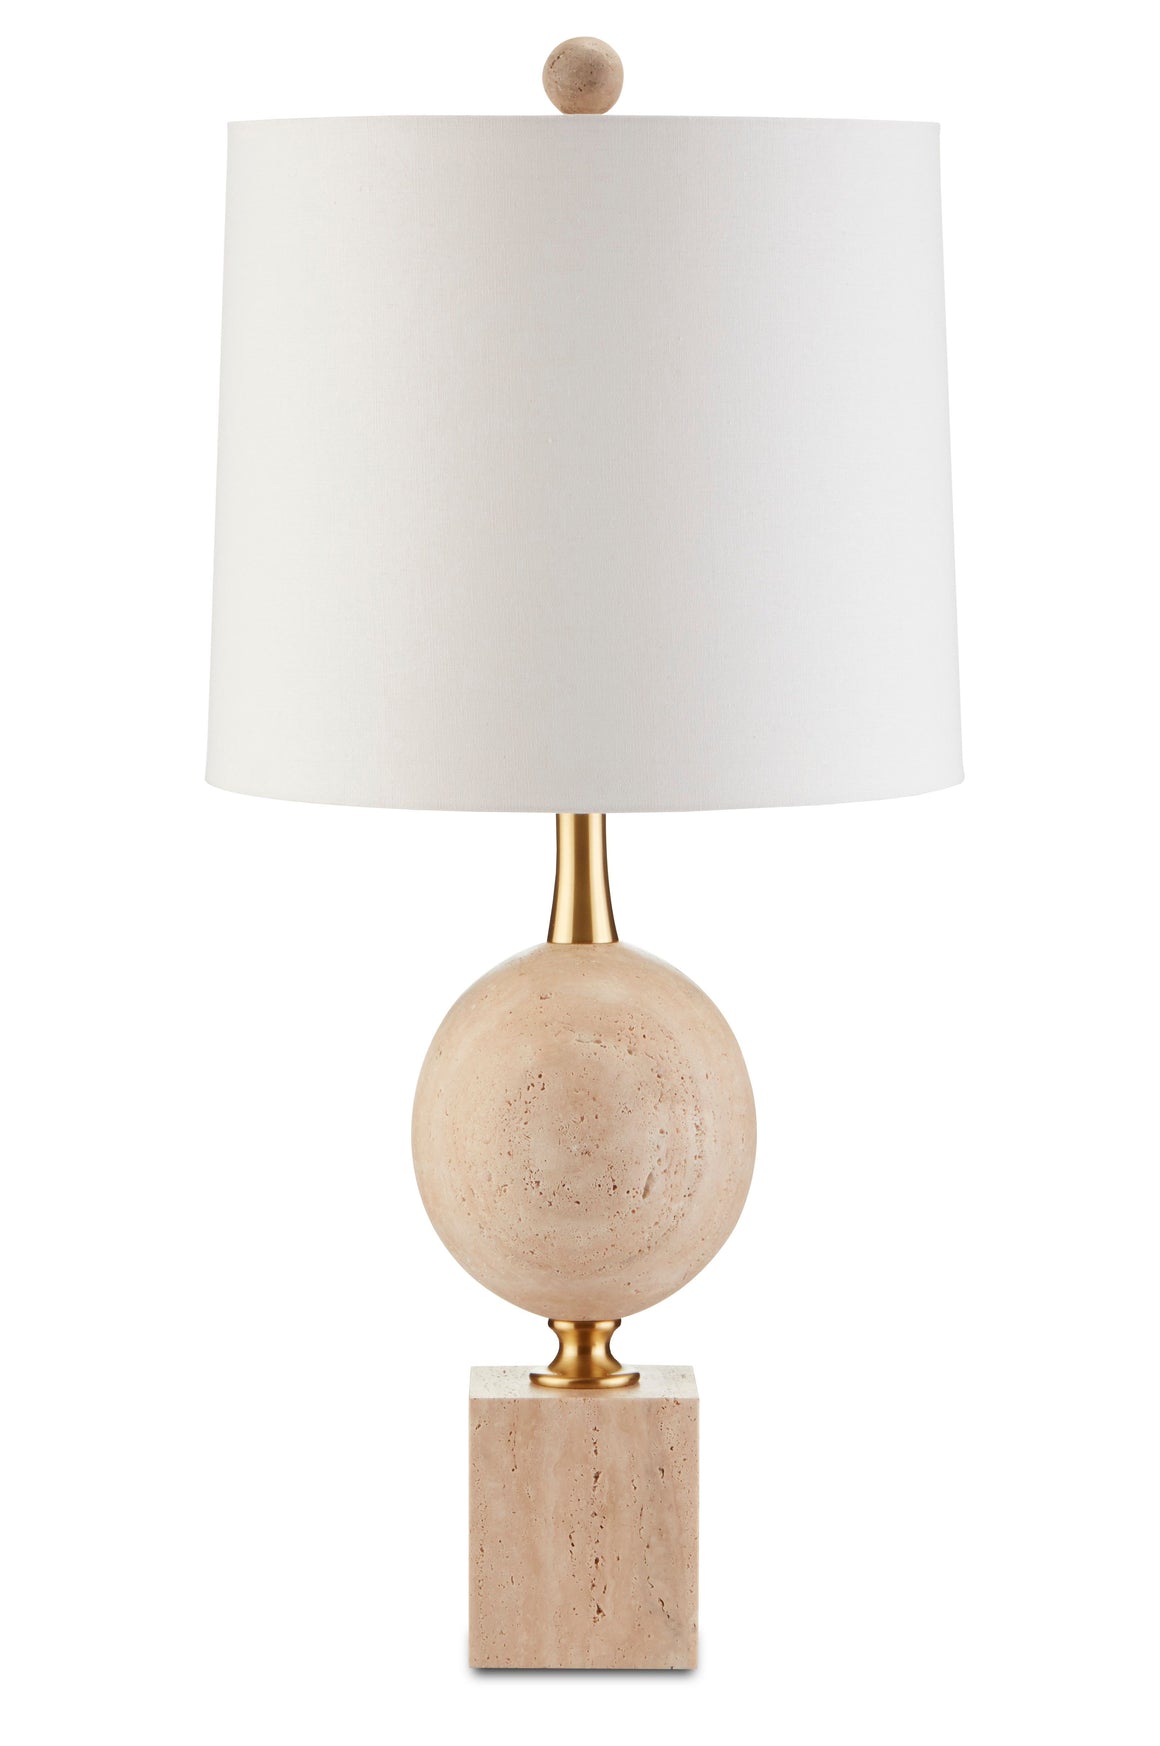 Currey and Company Adorno Table Lamp - Natural/Beige/Antique Brass